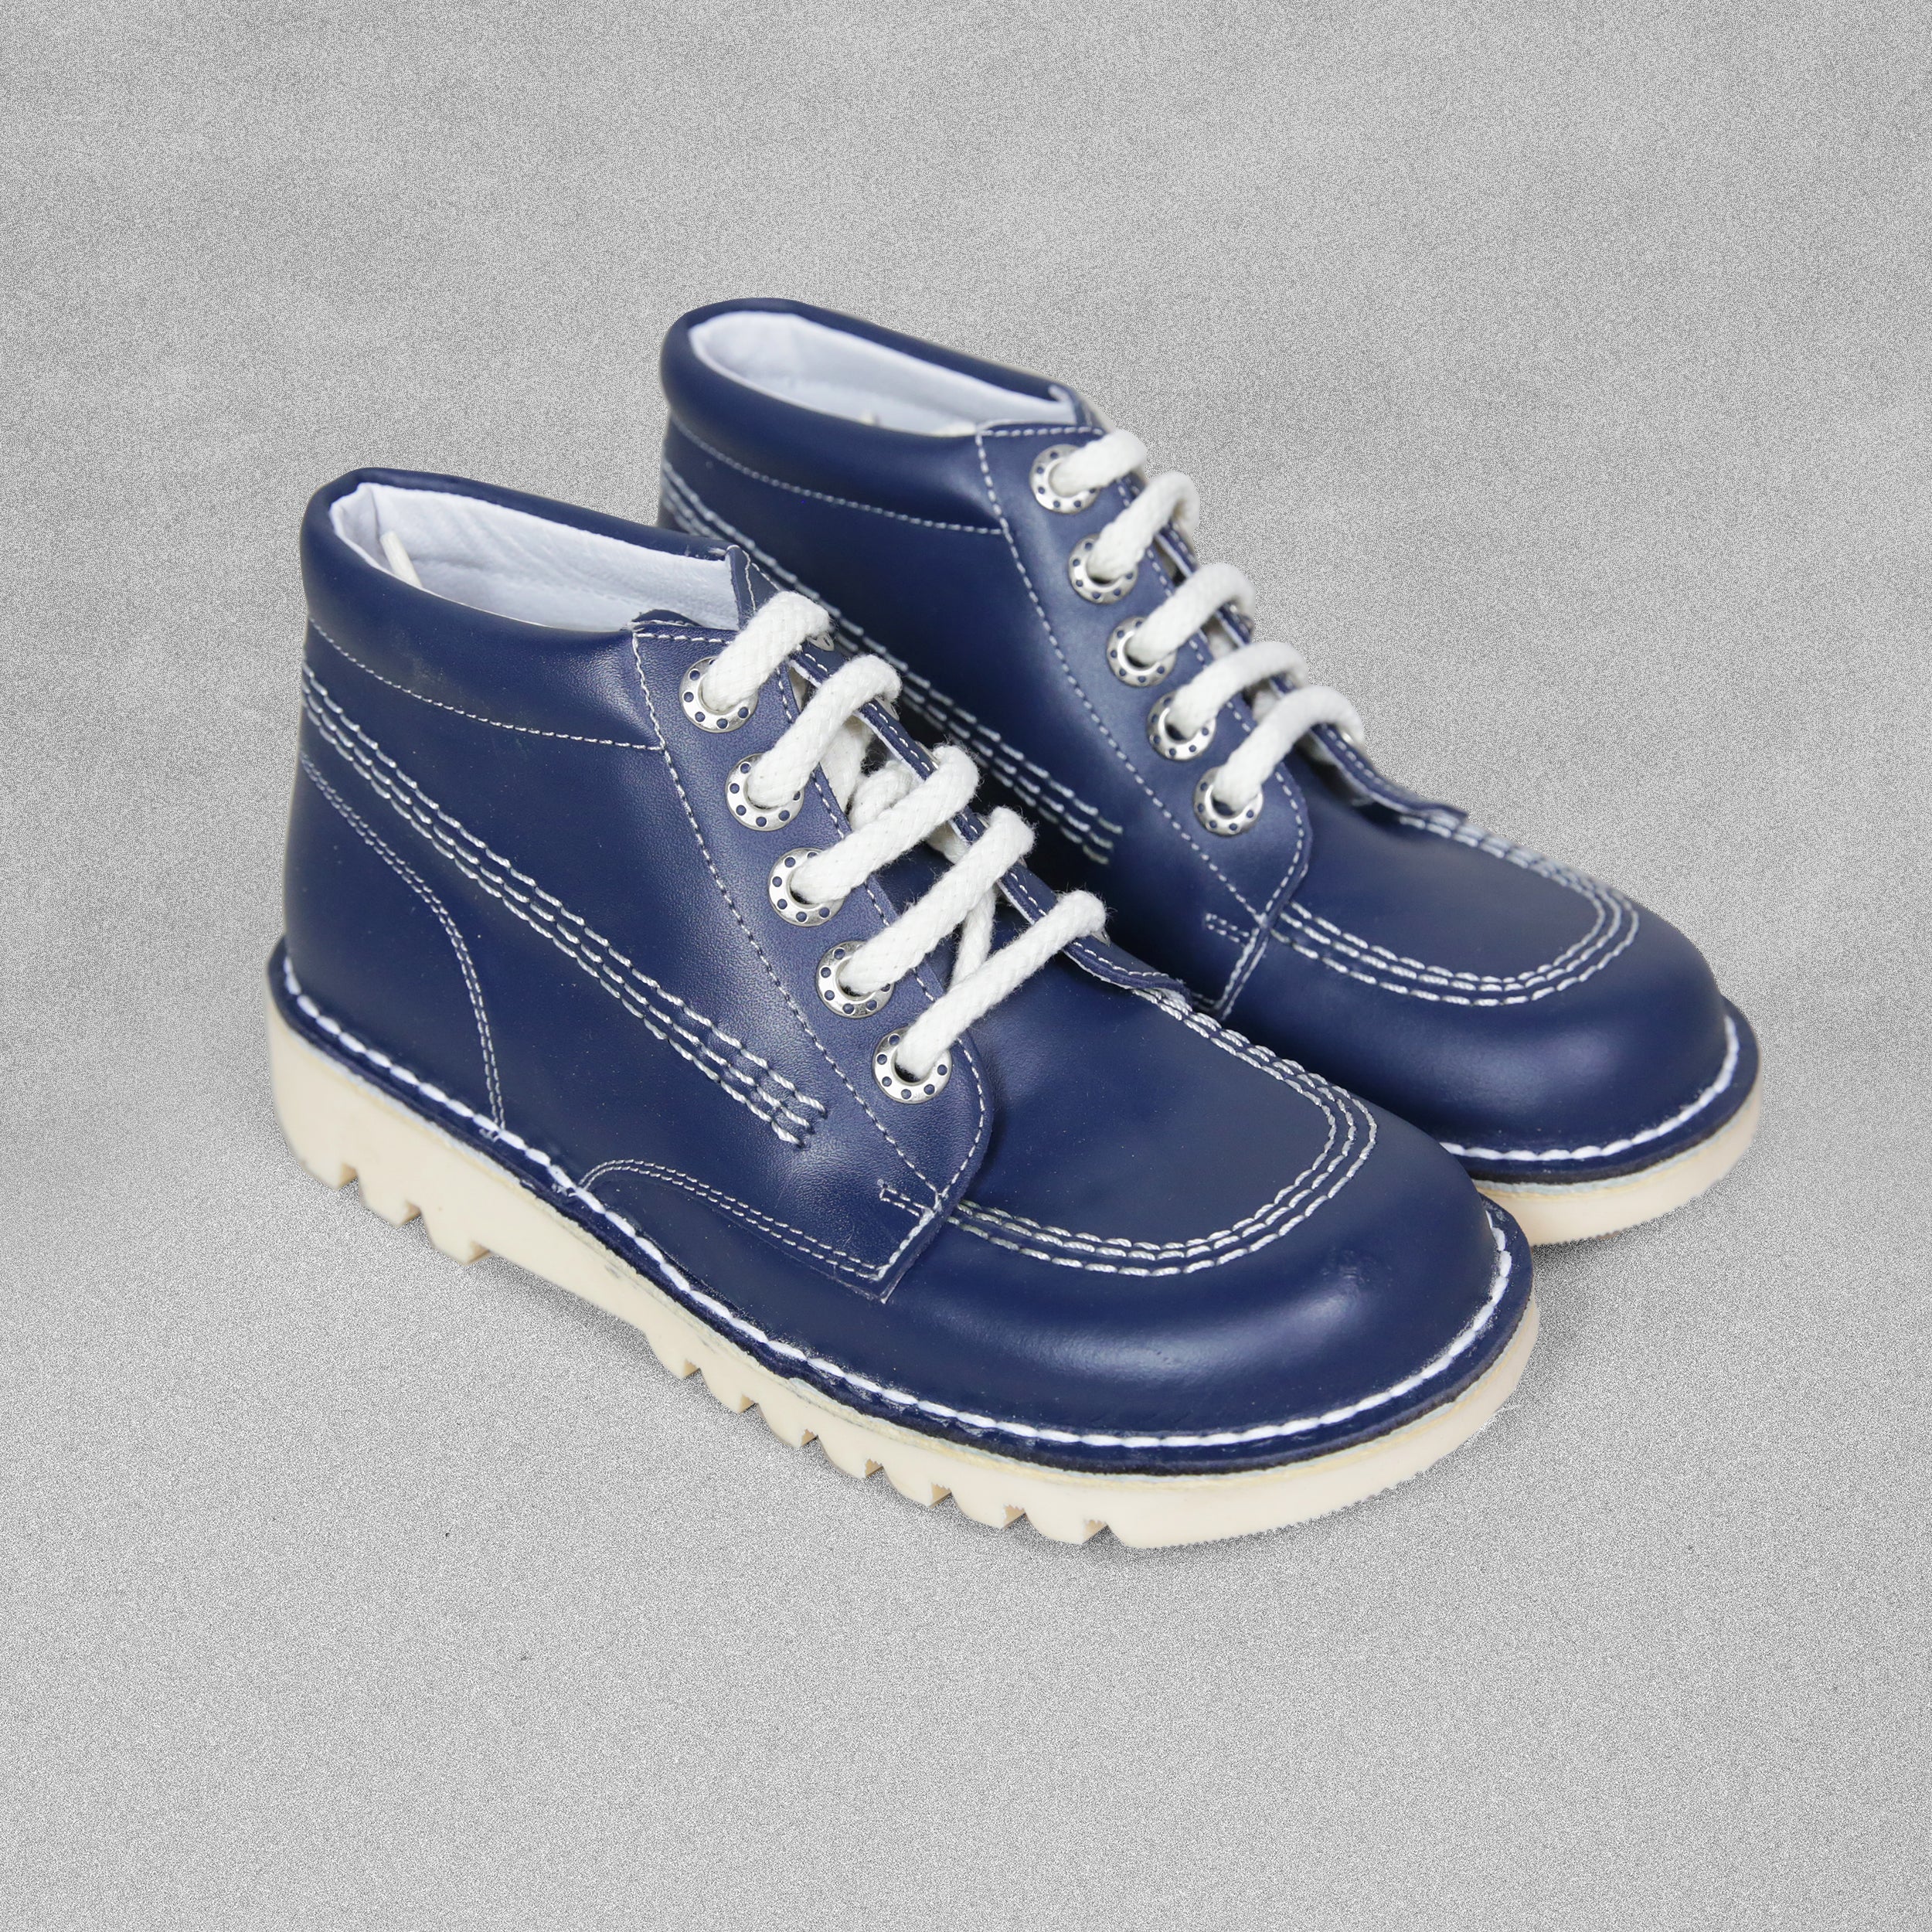 Shoeting Stars Navy Kicker Style Lace Up Boots